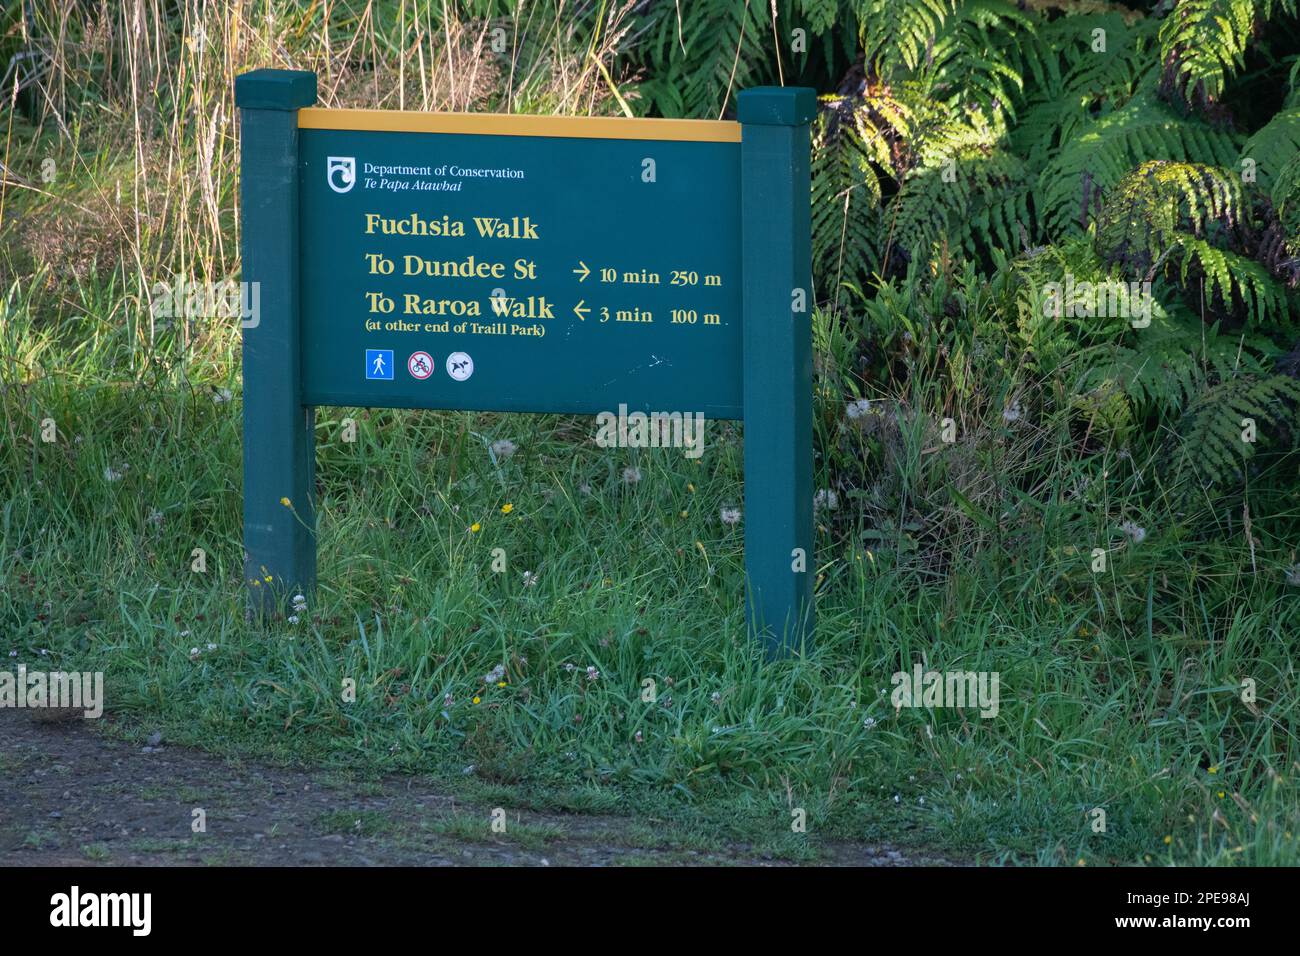 A sign placed by the Department of conservation indicating directions to get to the Fuchsia and Raroa Walk in Stewart island, Aotearoa New Zealand. Stock Photo